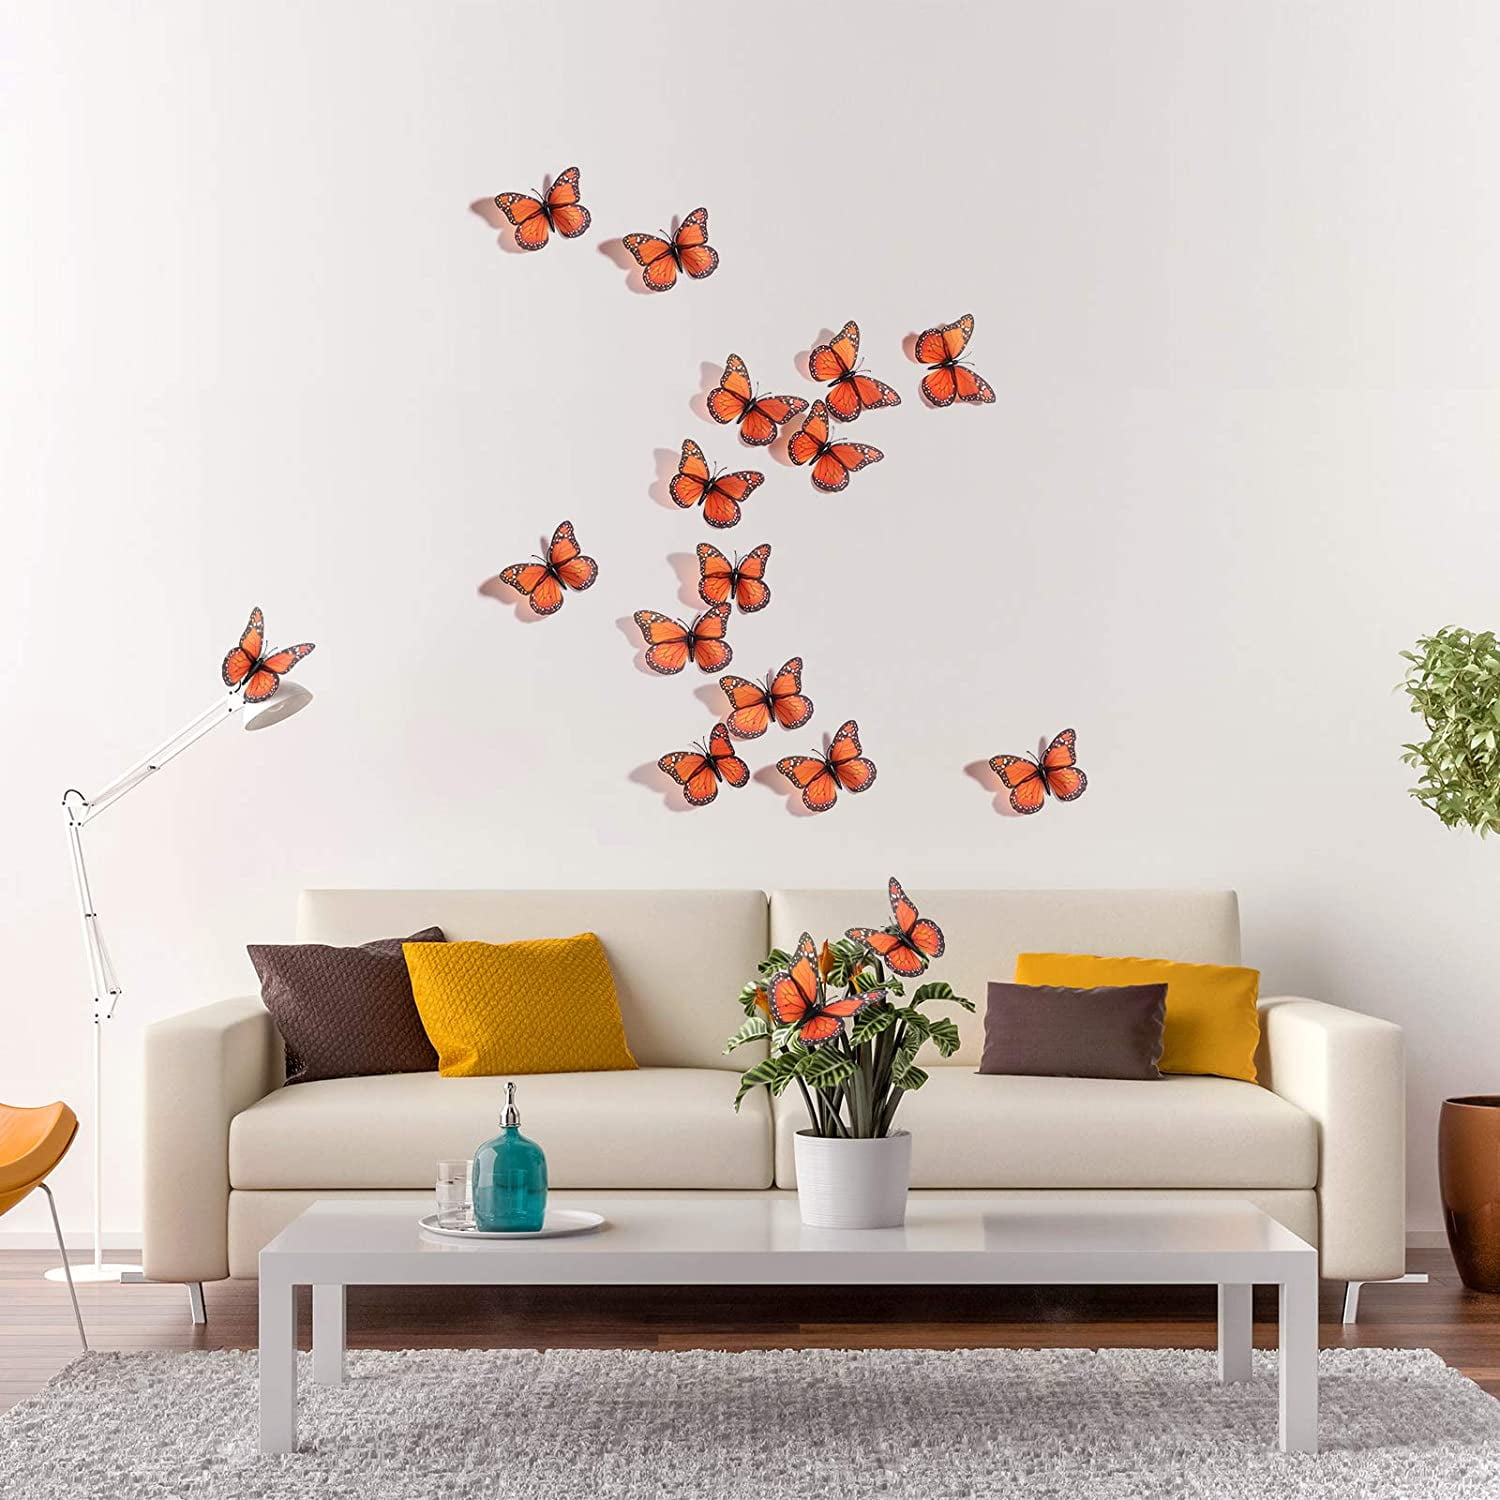 Syhood Monarch Butterfly Decorations Halloween Butterfly Wall Decor 4.7  inch Orange Artificial Fake Butterflies for Crafts 3D Magnet for Home Wall